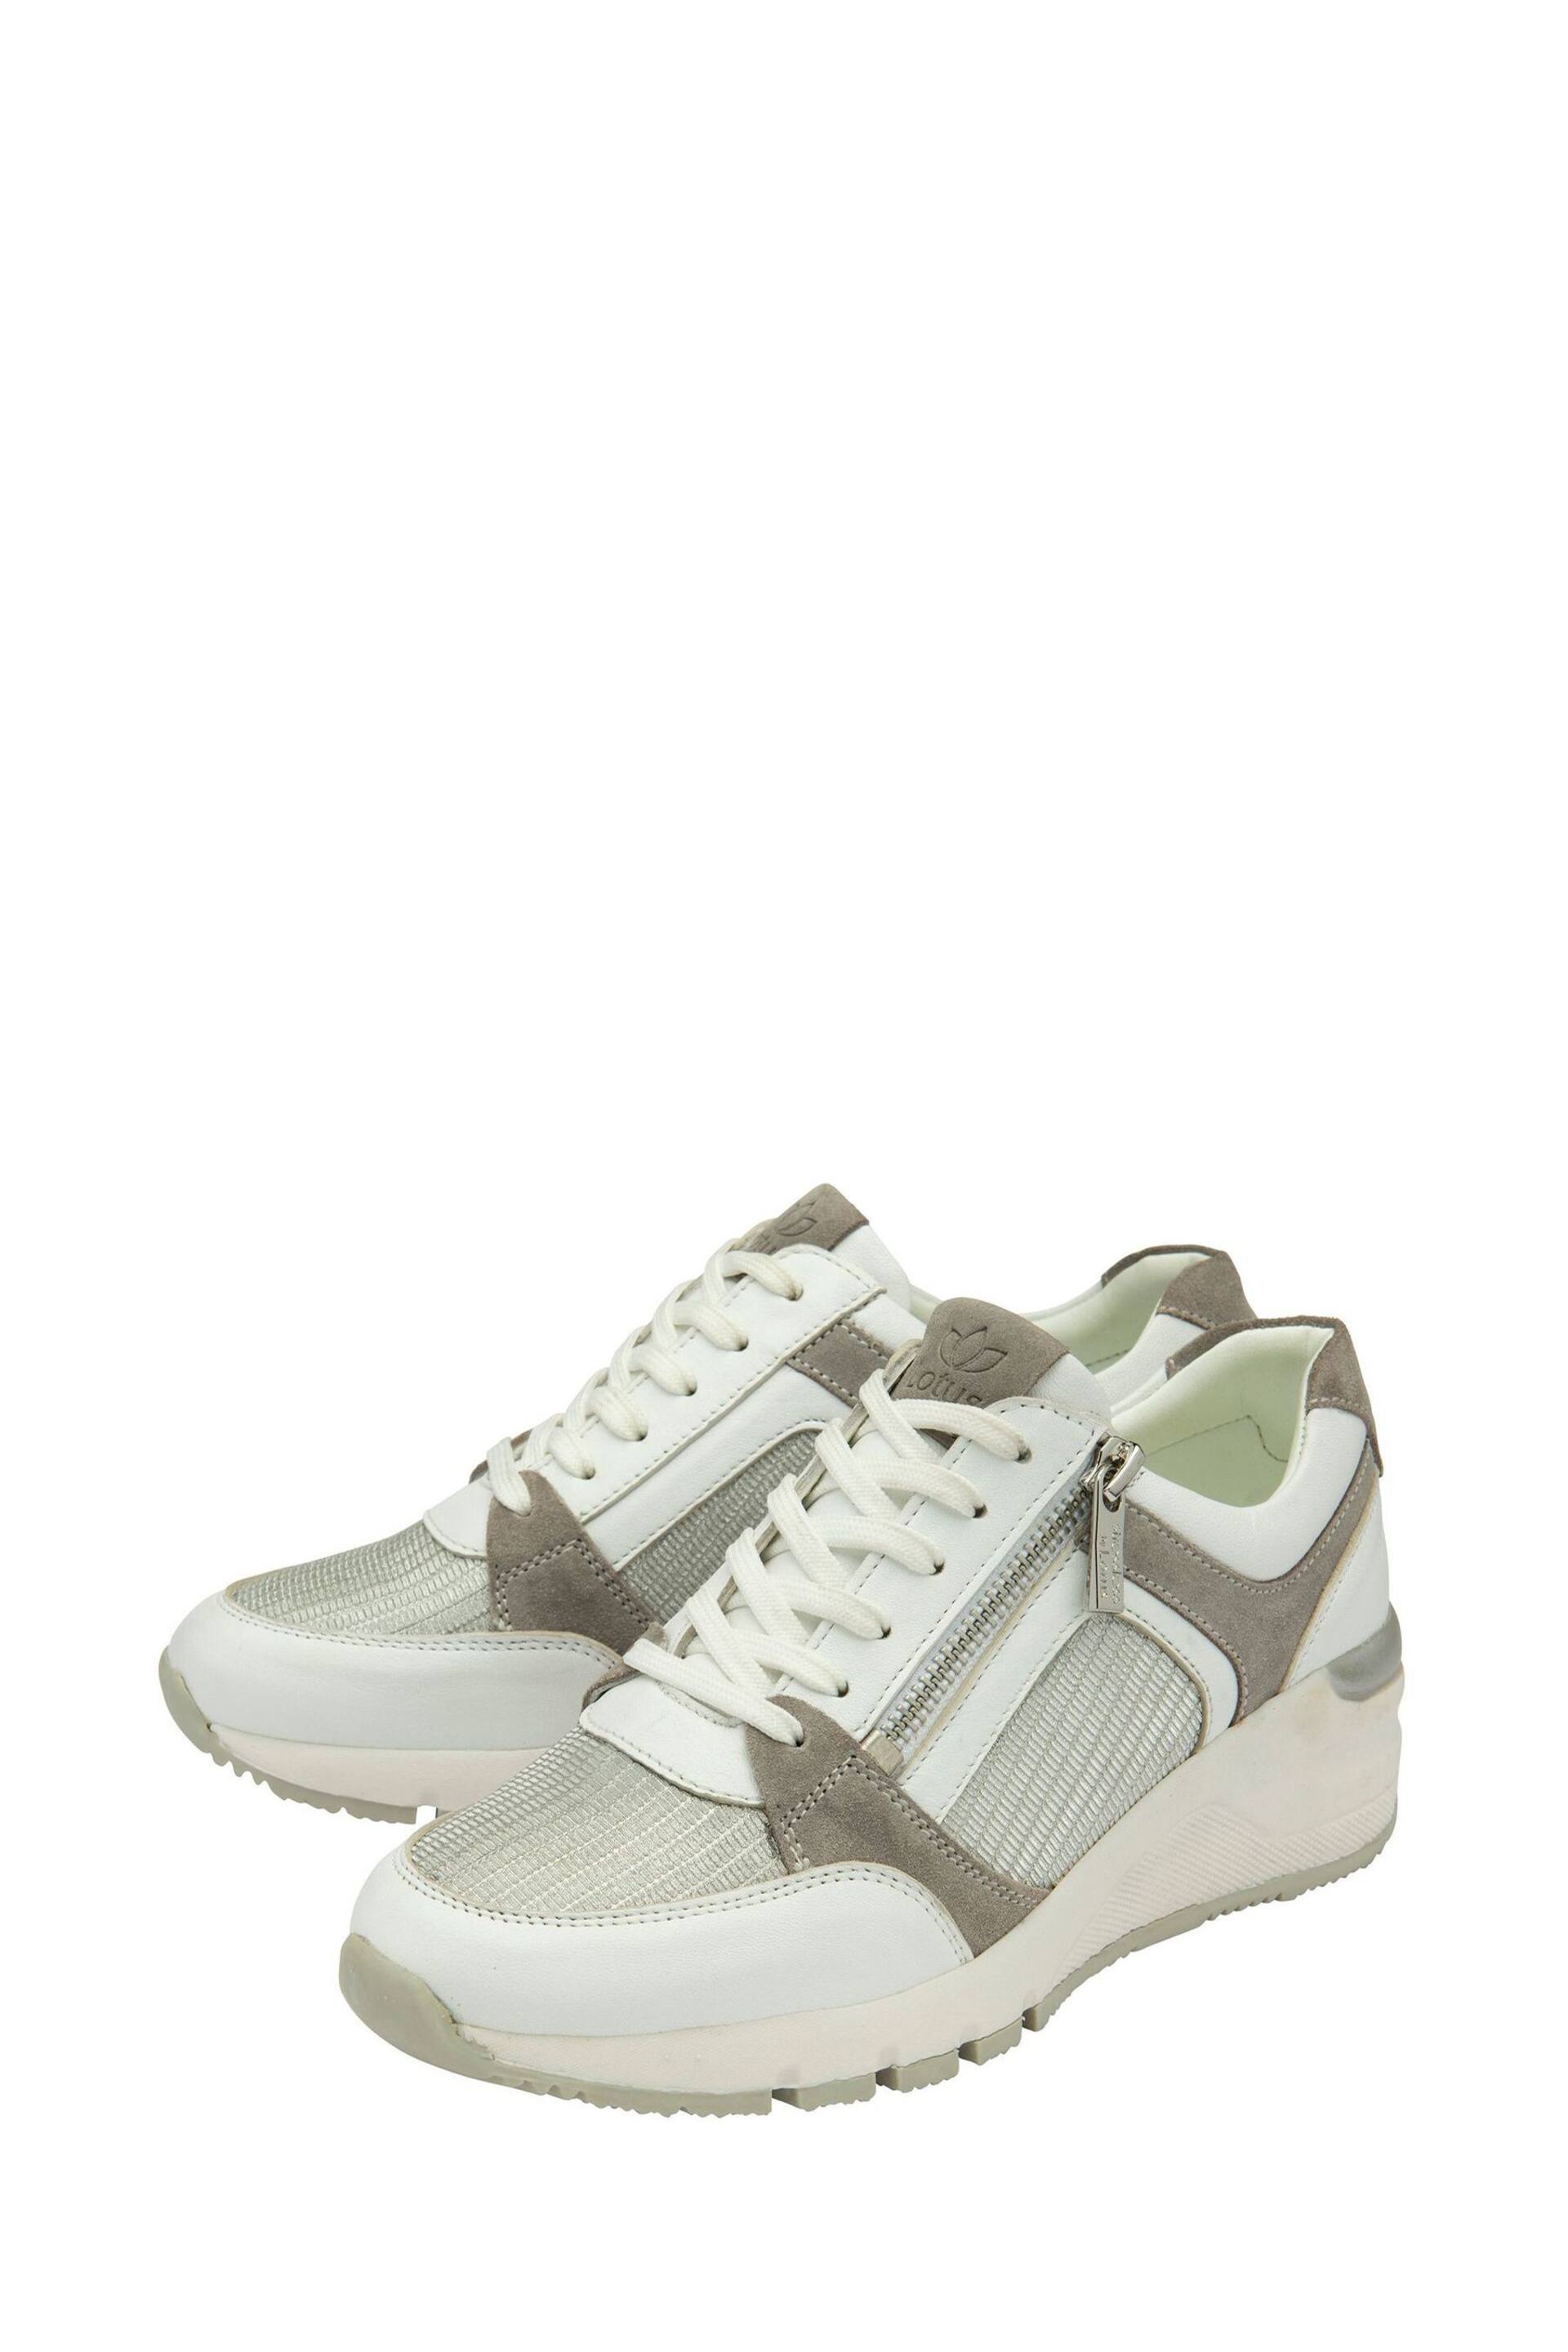 Lotus White Zip-Up Wedge Trainers - Image 2 of 4